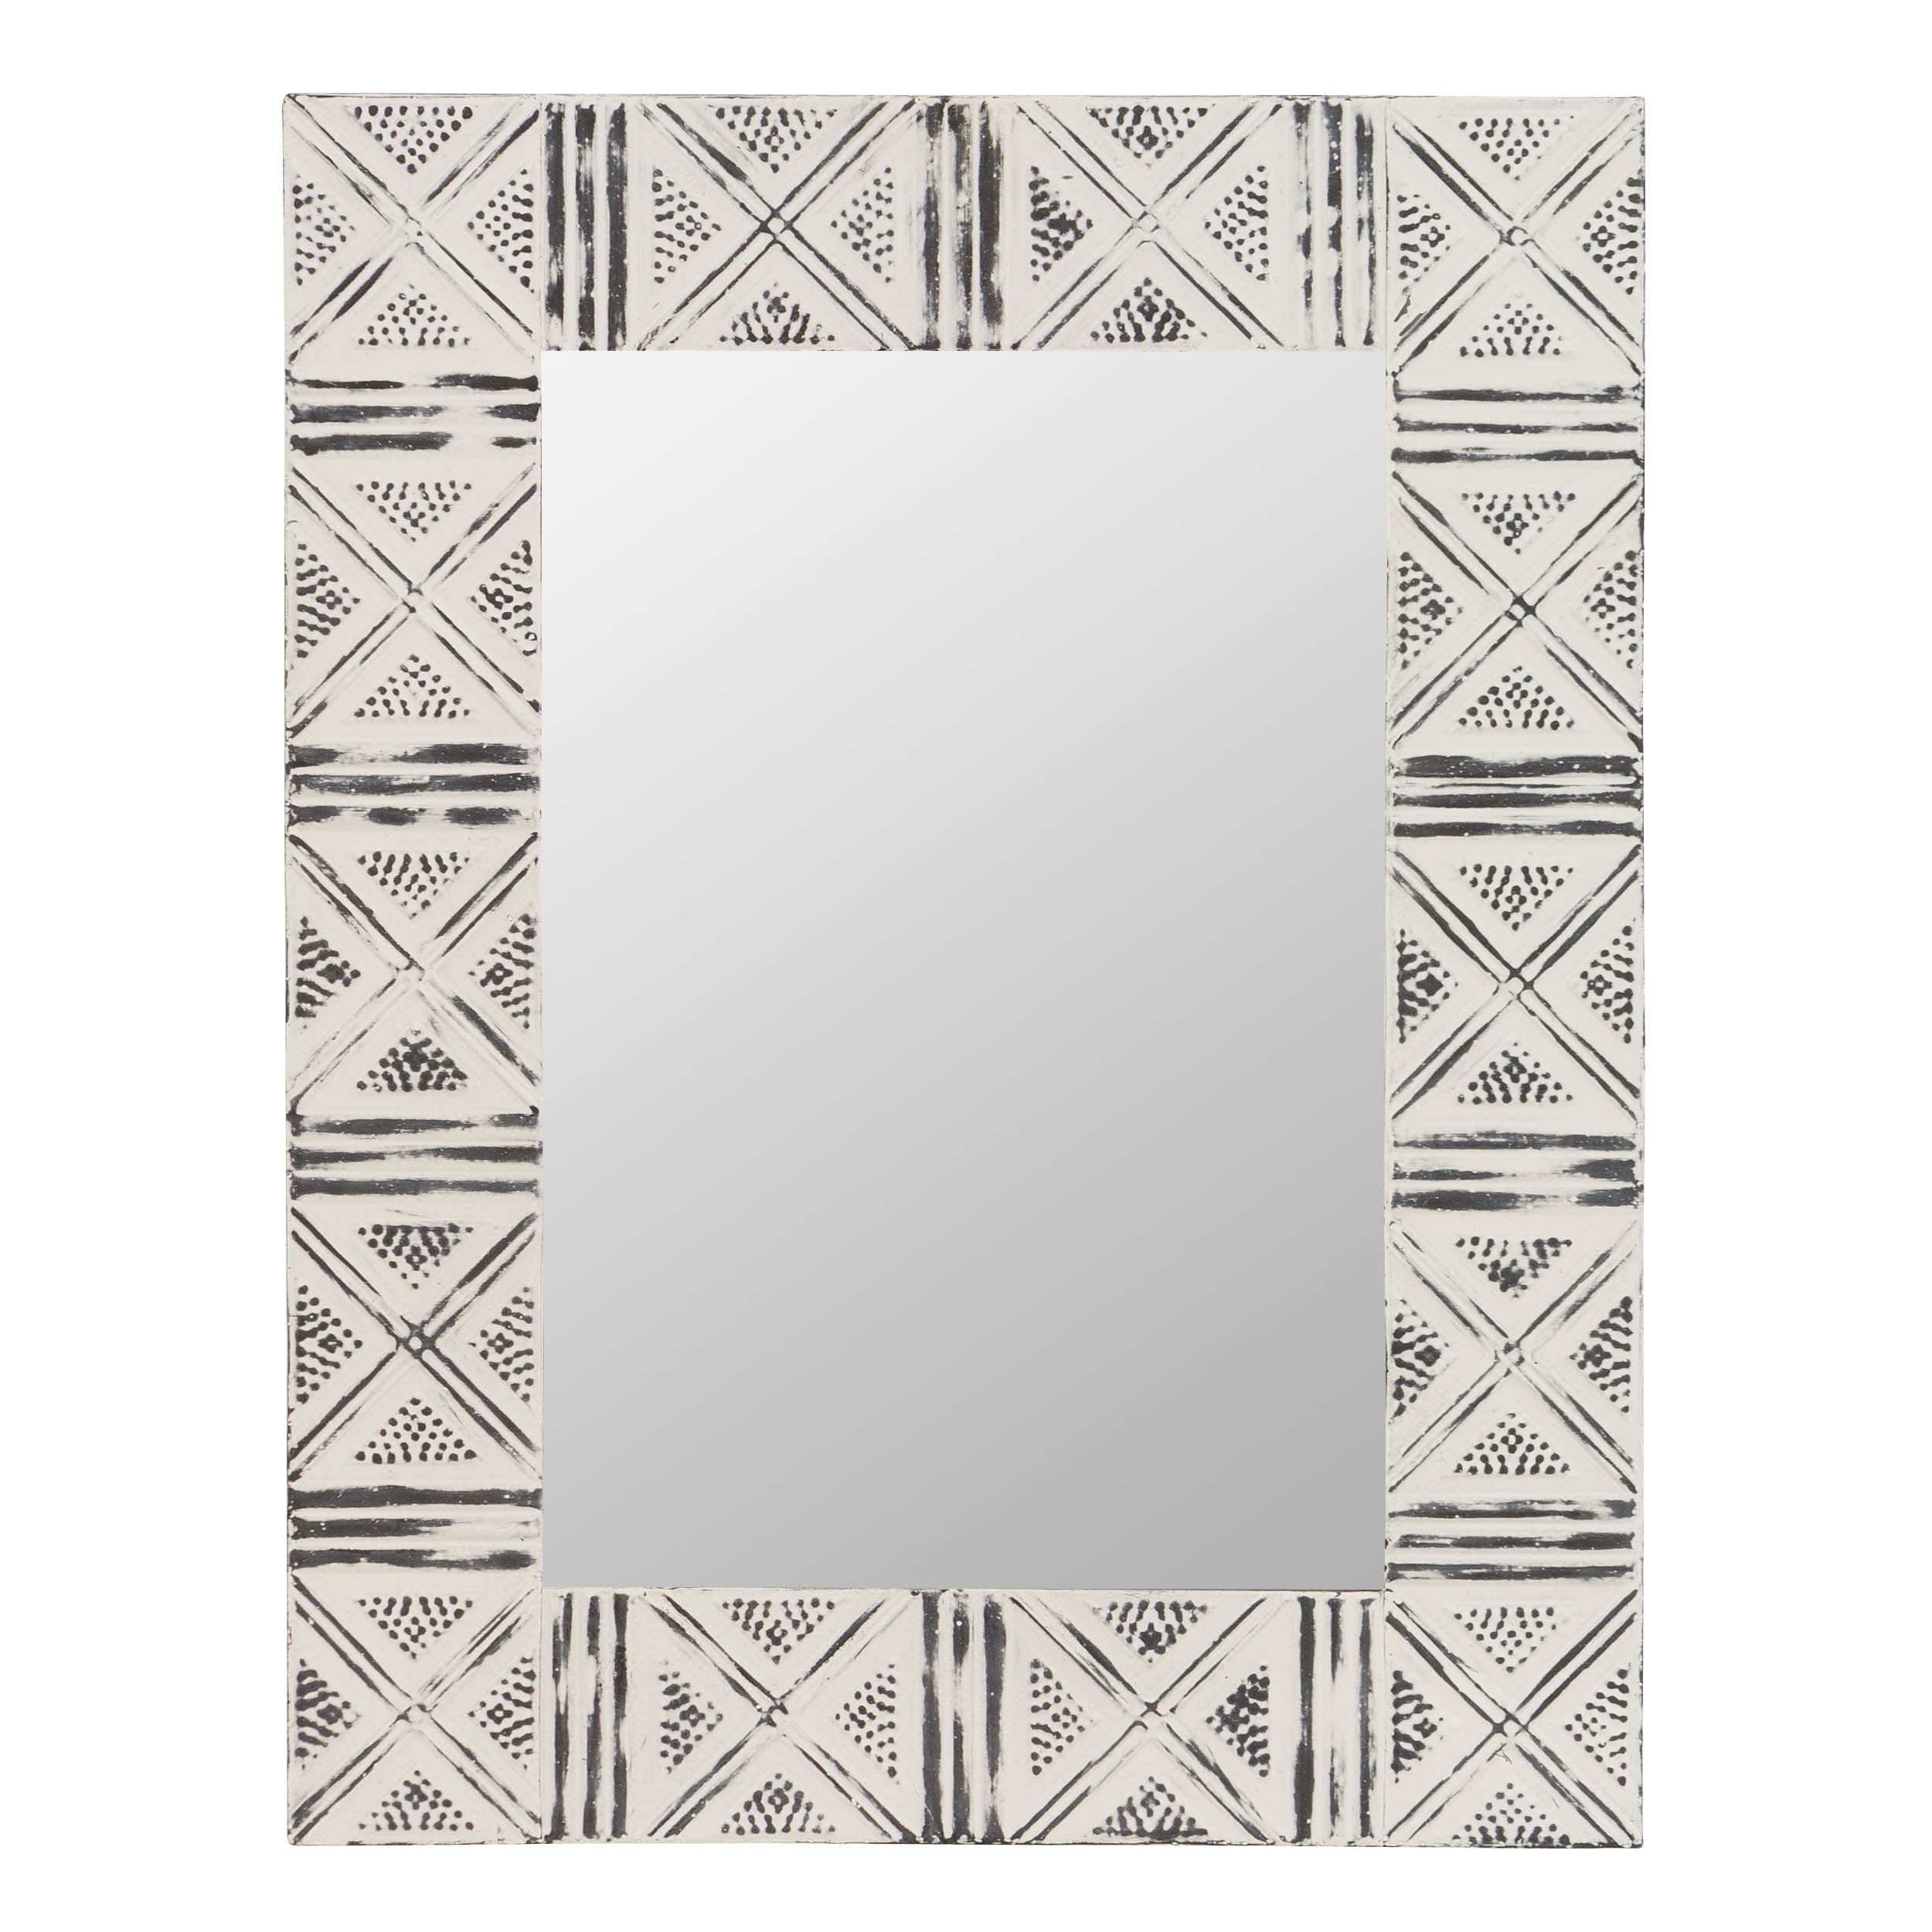 Picture of Aspire Home Accents 7389 Polina Wall Mirror, White